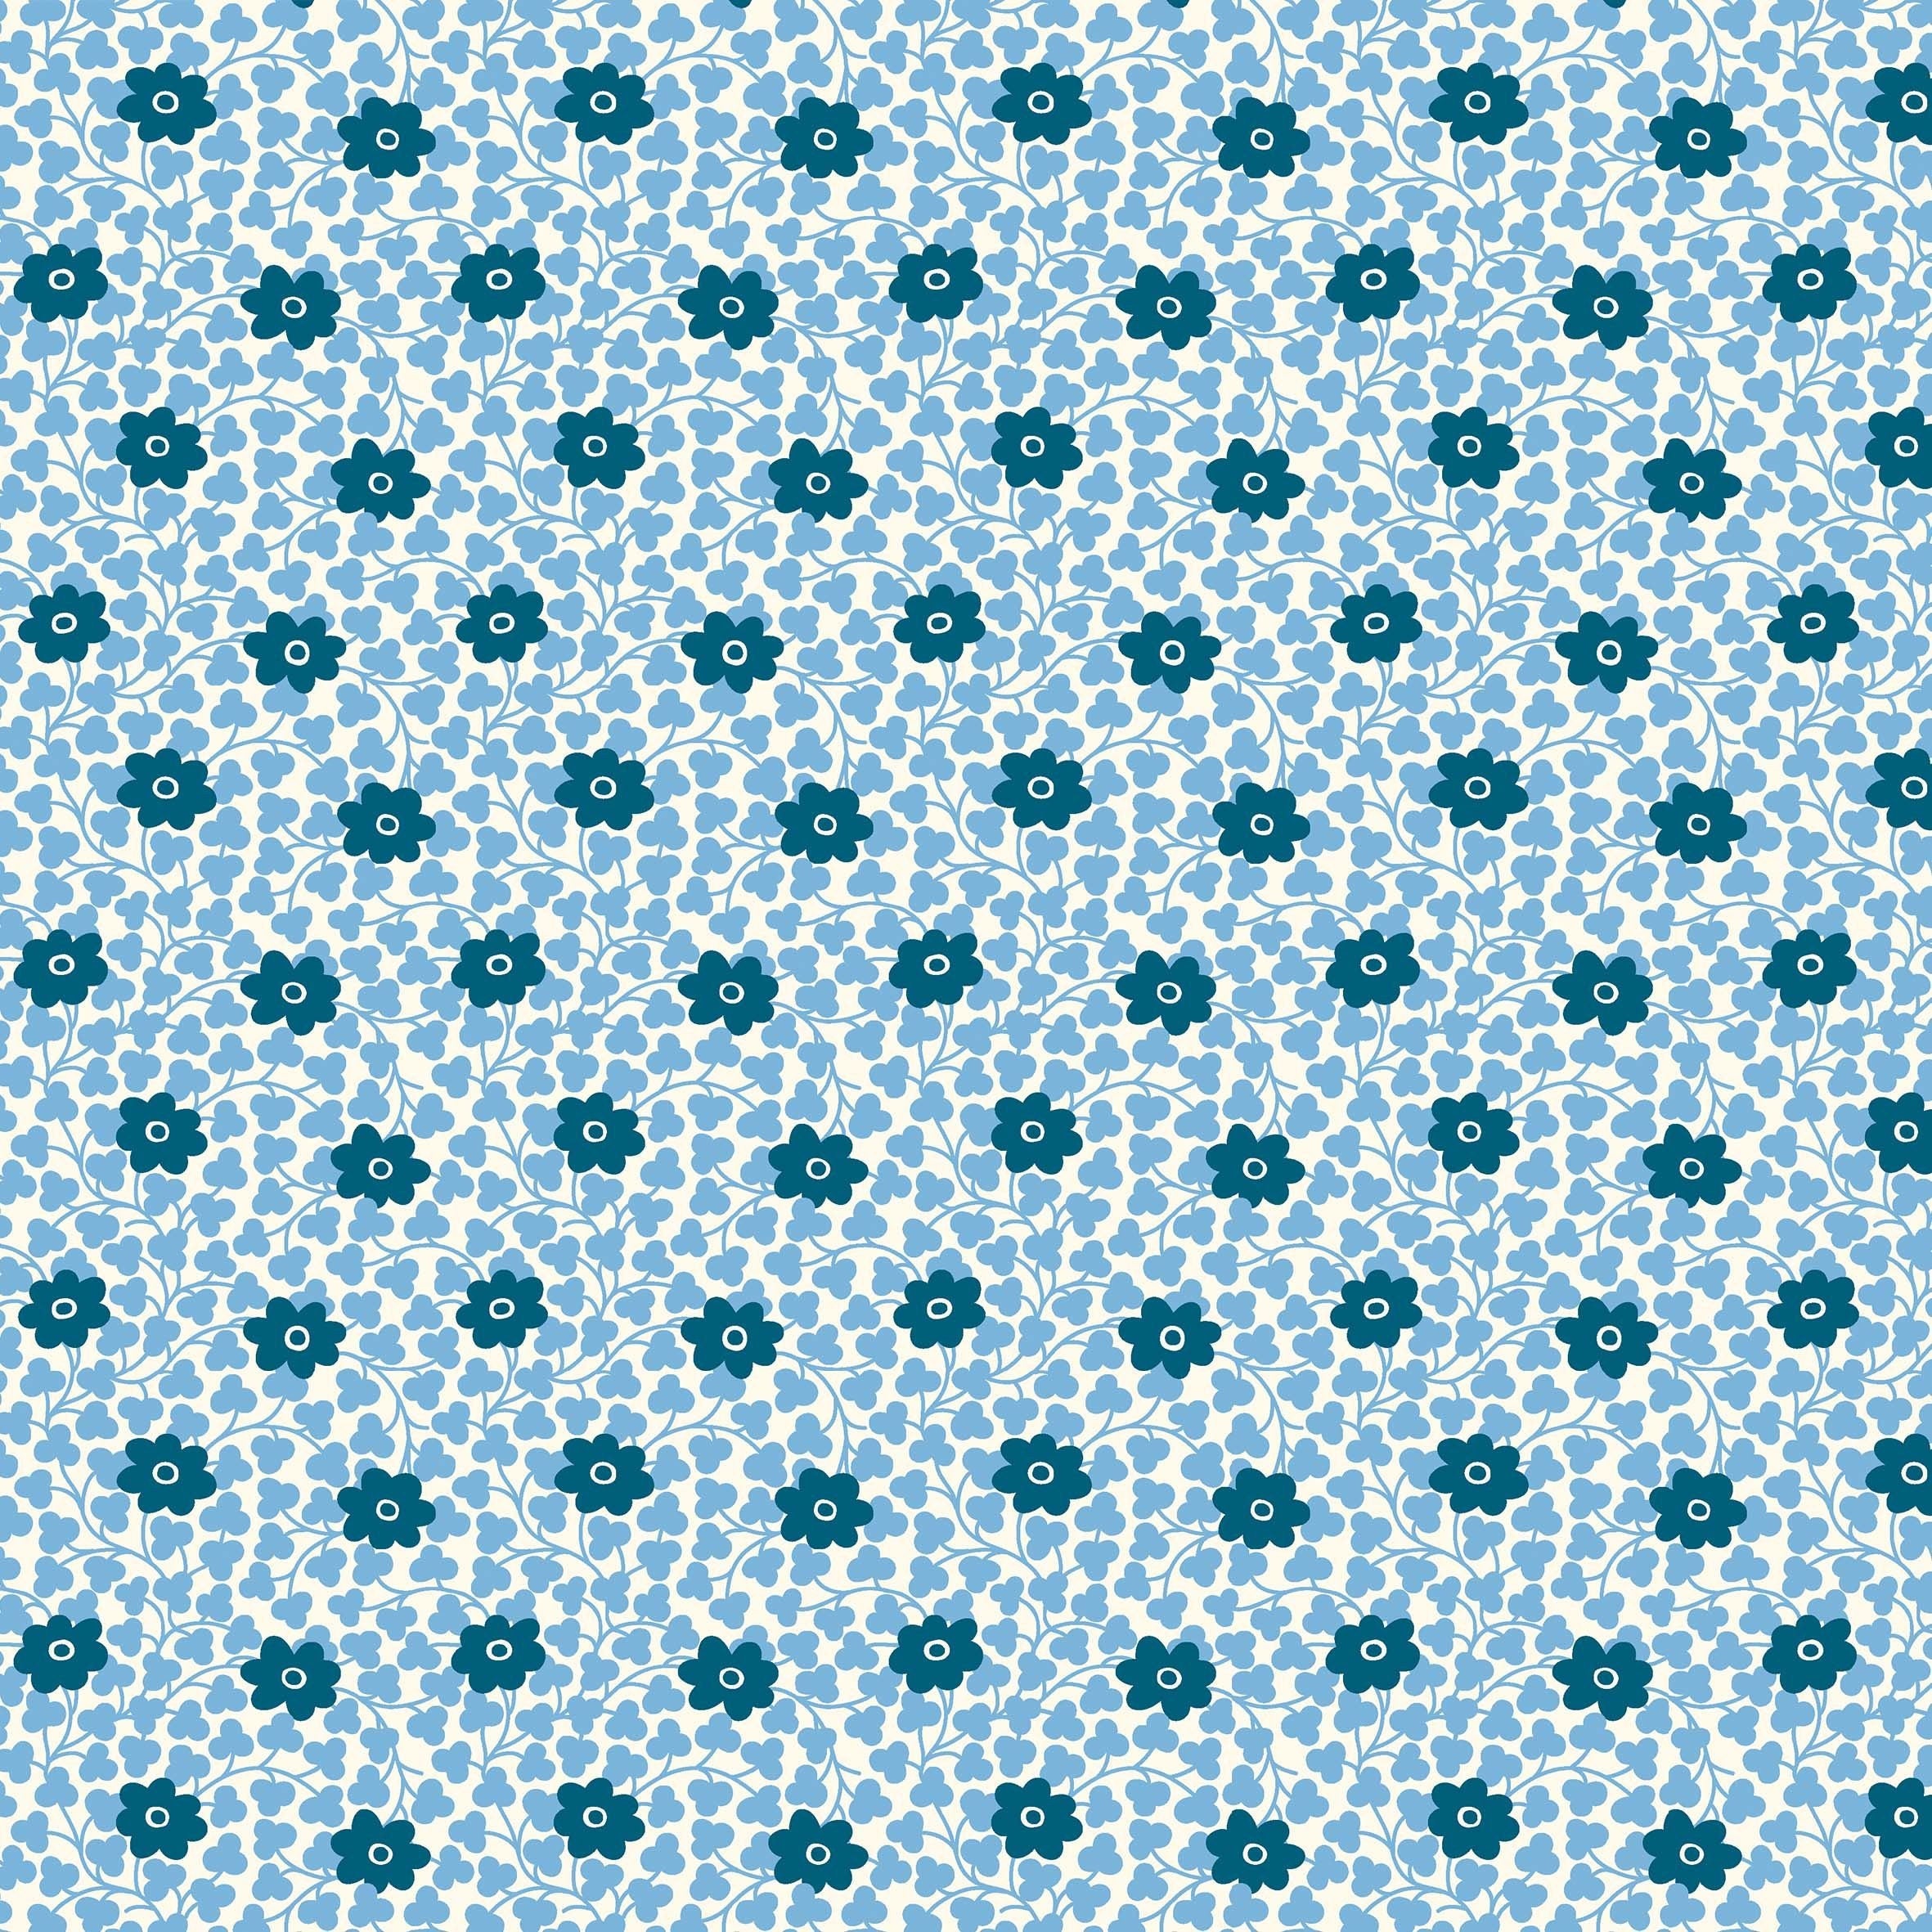 bue flowers on blue leave - Liberty 'Chelsea Flower' flower Show Midsummer cotton fabric